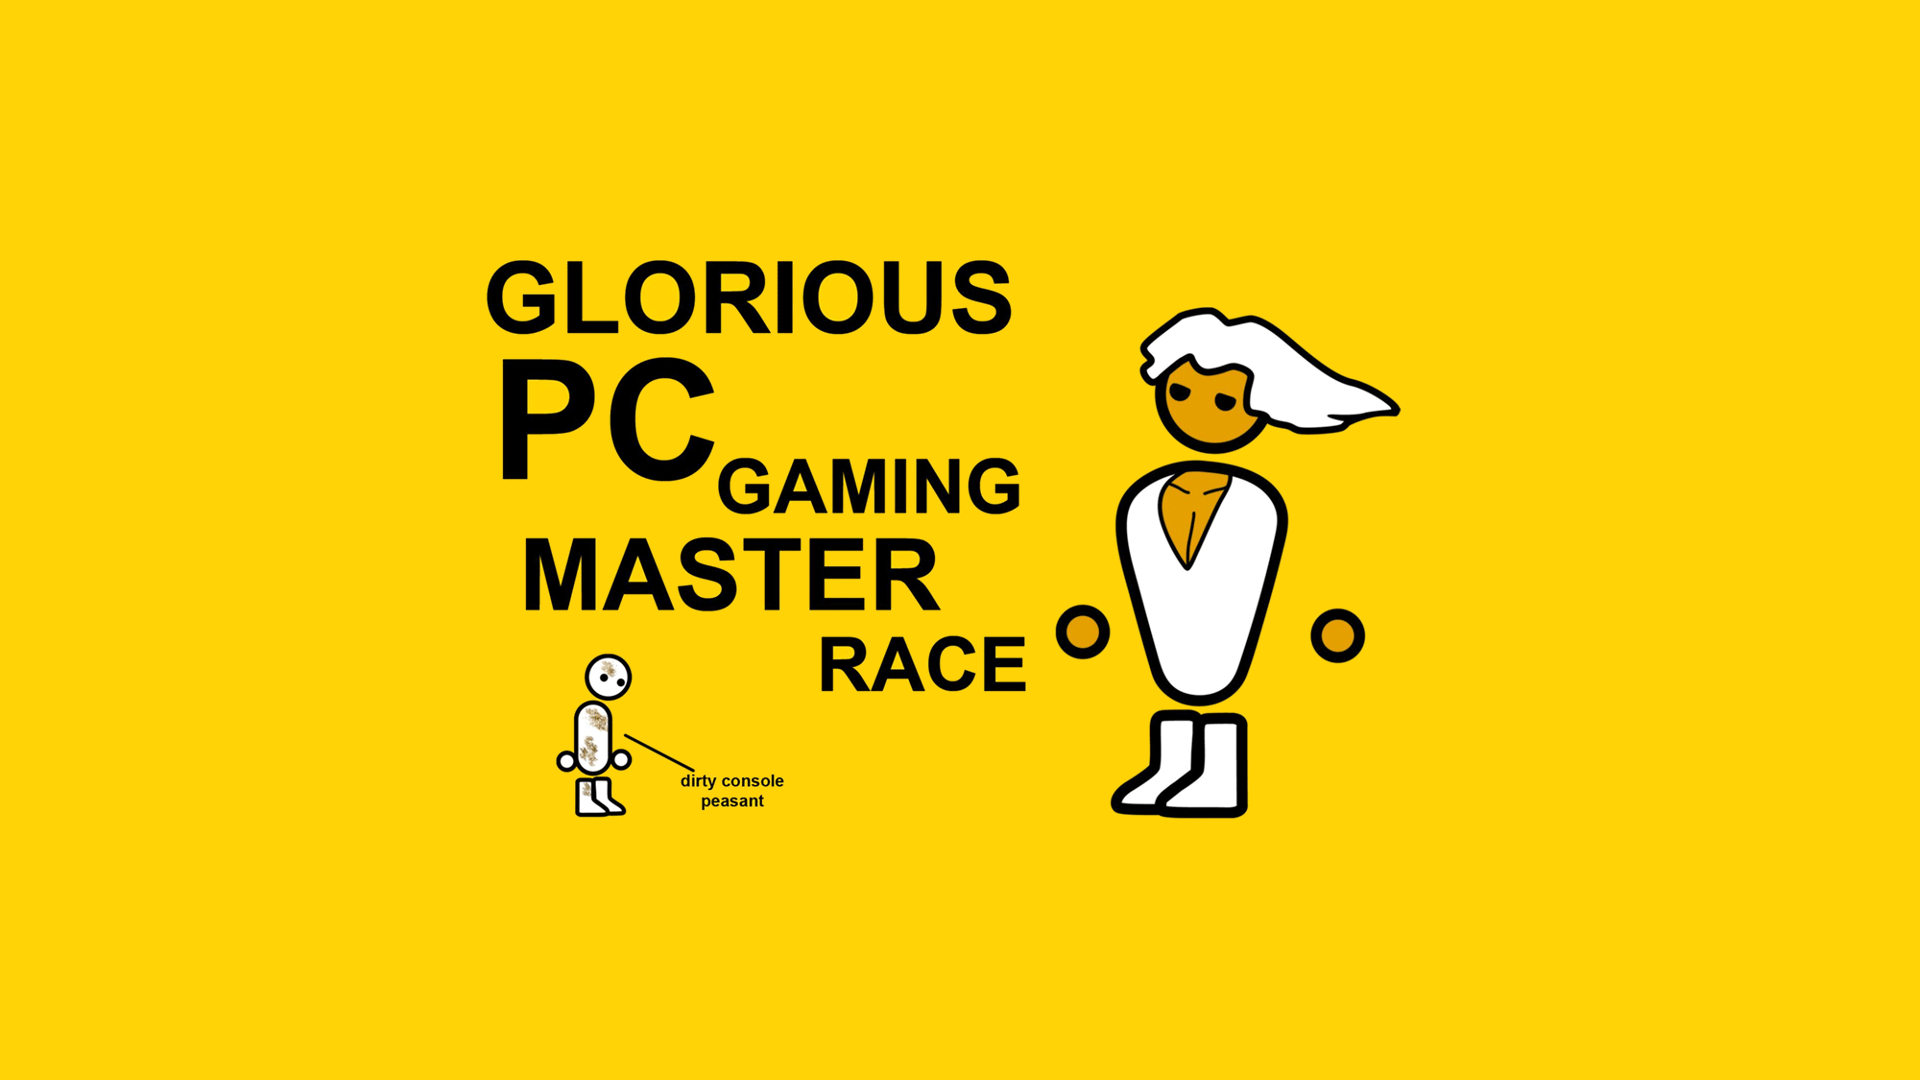 General 1920x1080 Zero Punctuation minimalism yellow background PC gaming Master Race simple background humor